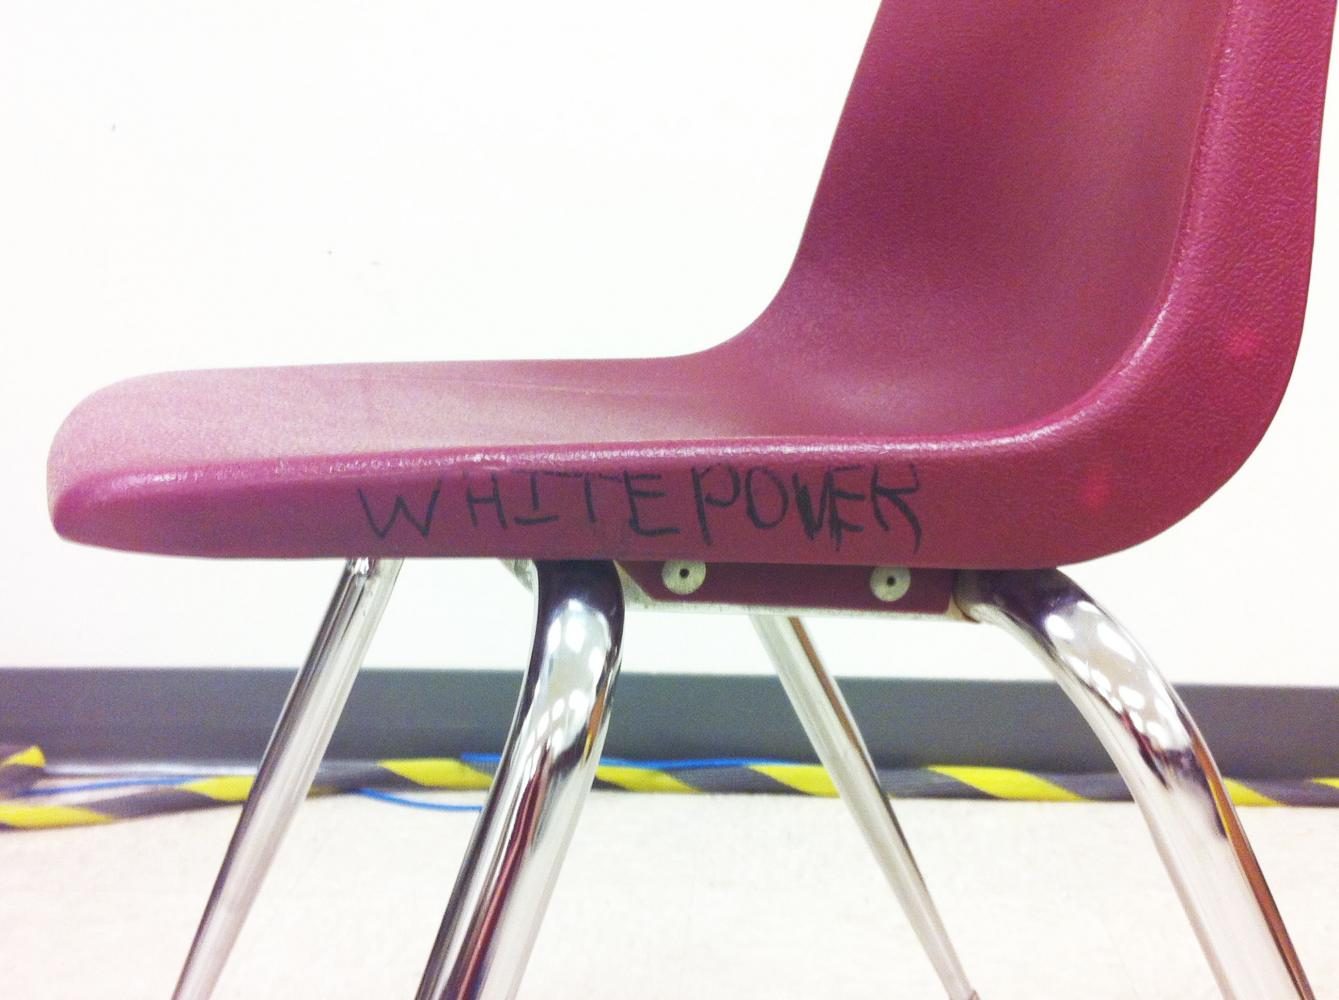 The+words+WHITE+POWER+are+acratched+onto+a+desk+chair+in+an+engineering+classroom.+It+shows+the+lack+of+racial+tolerance+that+exists+in+the+Zone.